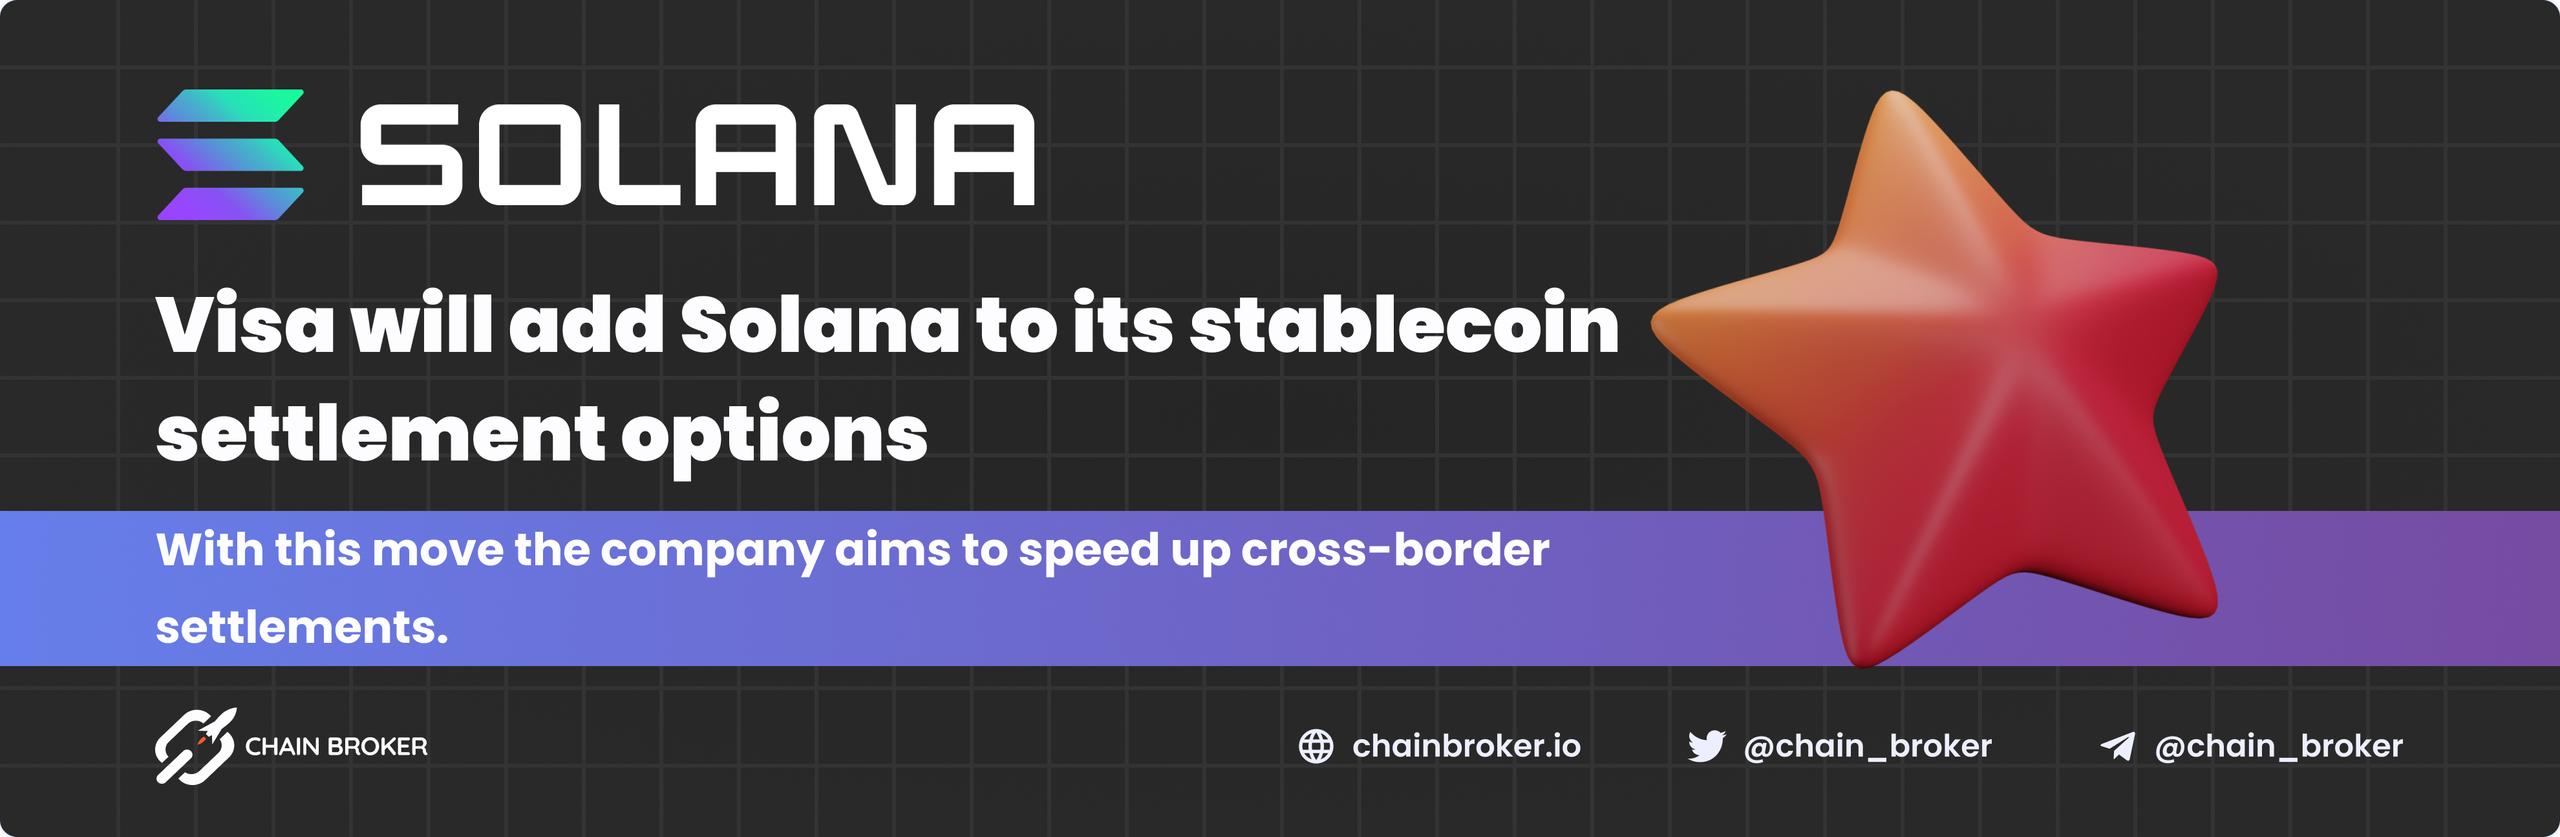 Visa will add Solana to its stablecoin settlement options.